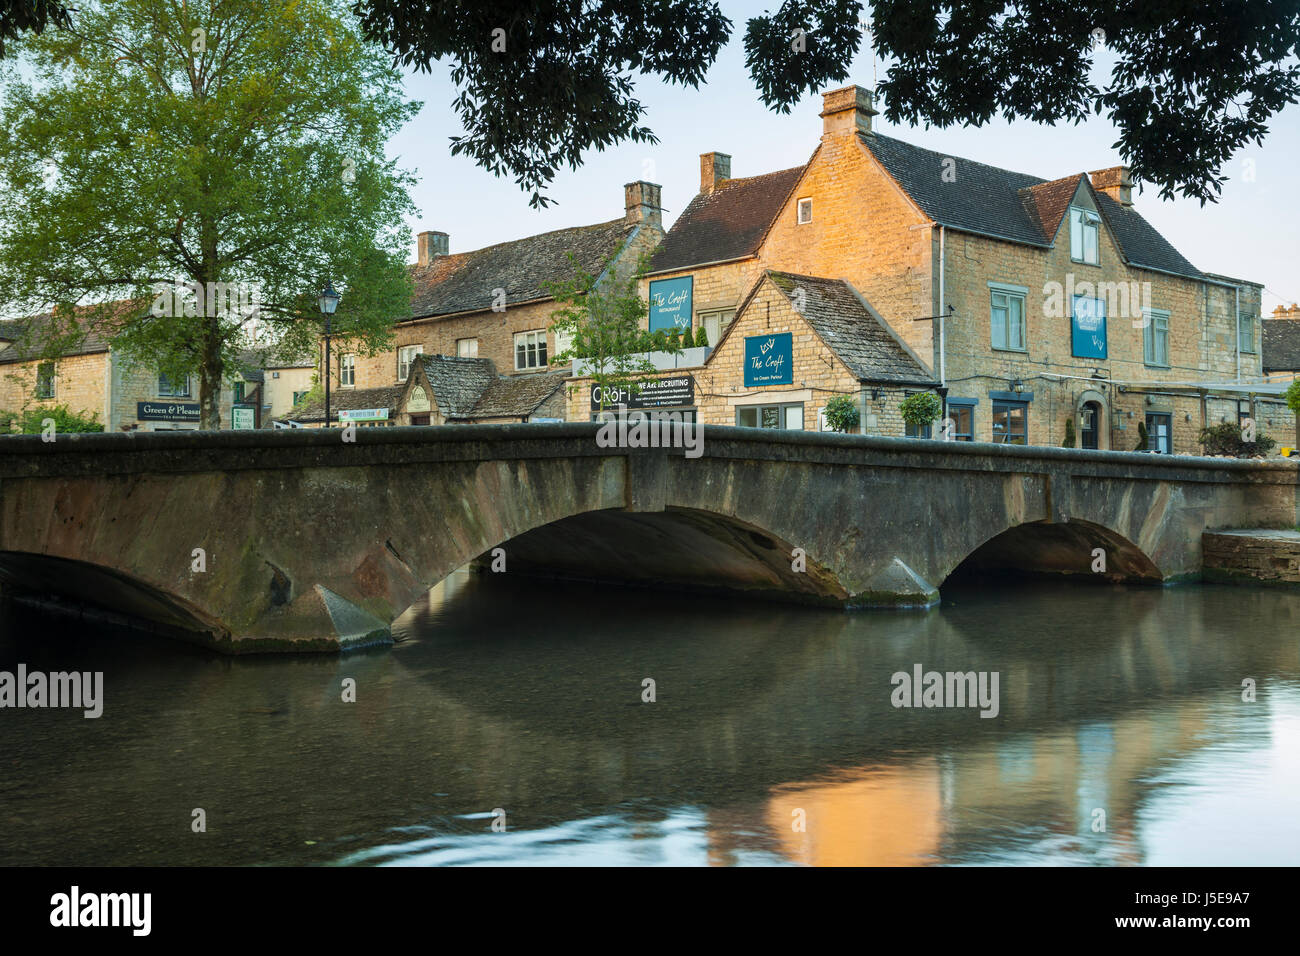 Frühling-Sonnenaufgang in der Cotswold Dorf von Bourton-on-the-Water, Gloucestershire, England. Stockfoto